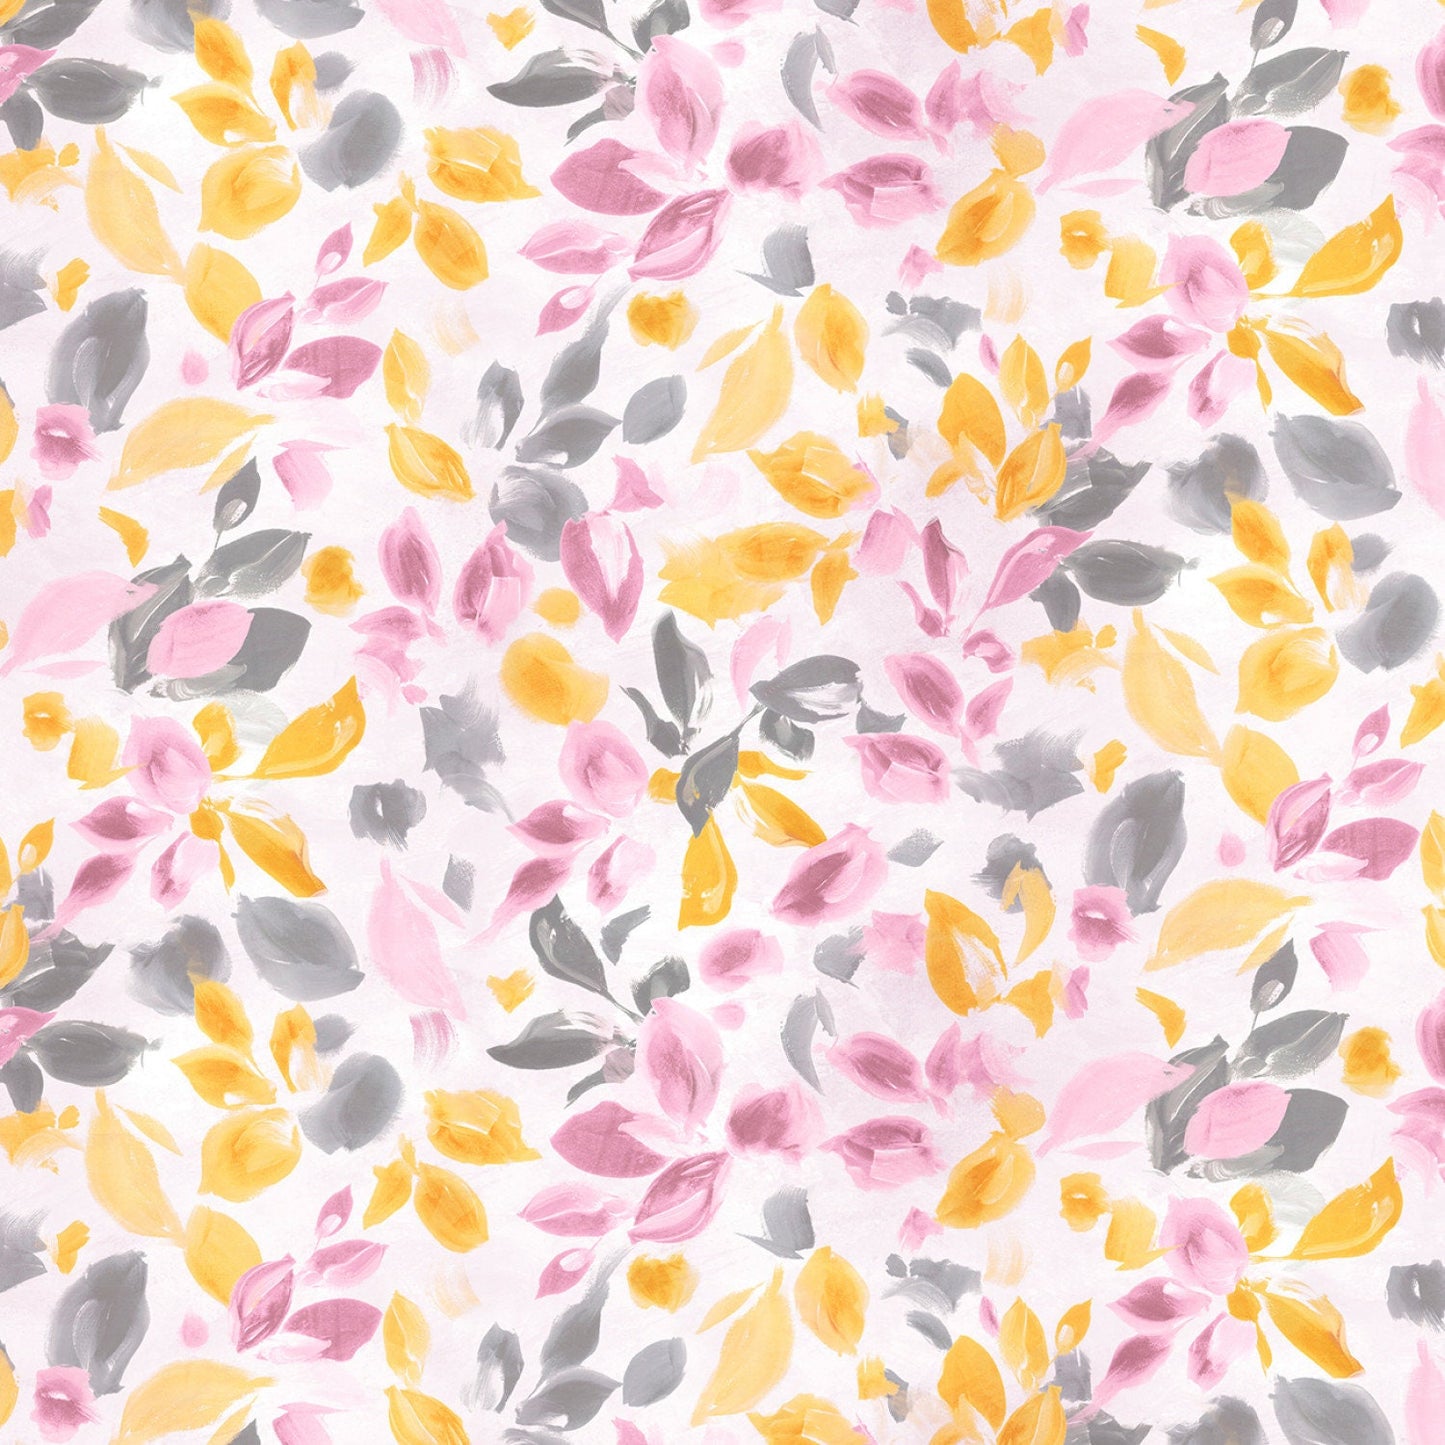 Painted Petals Charm Pack, P & B Textiles PPET5X5, Peach Pink Yellow Floral Quilt Fabric Squares, 5" Inch Precut Fabric Squares